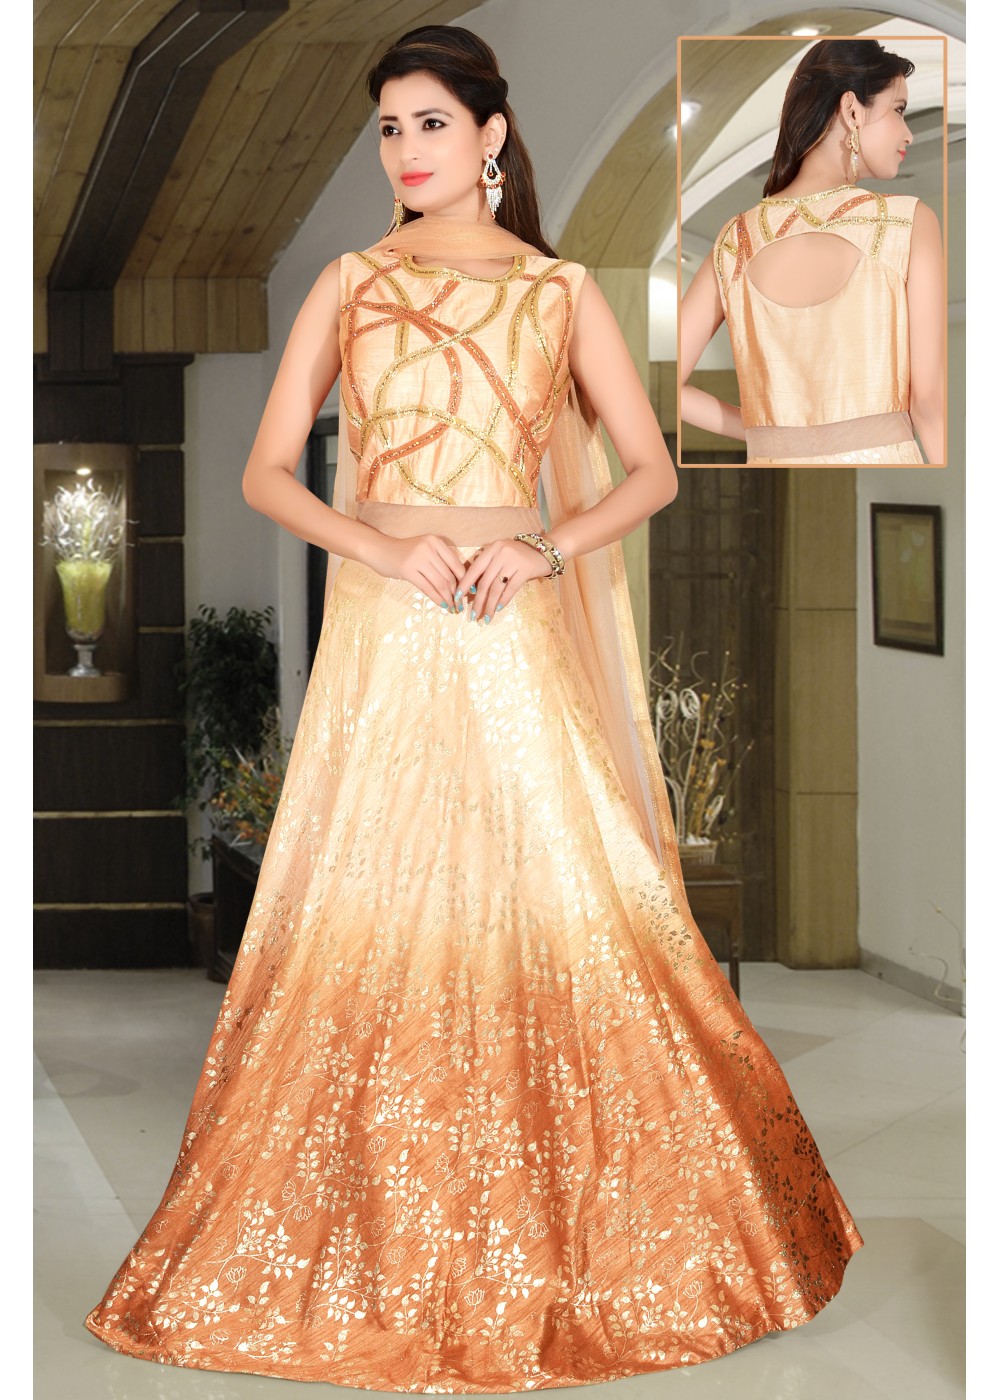 Peach Cinderella Divine CD2635 Long Jewel Embellished Formal Prom Gown for  $158.99 – The Dress Outlet